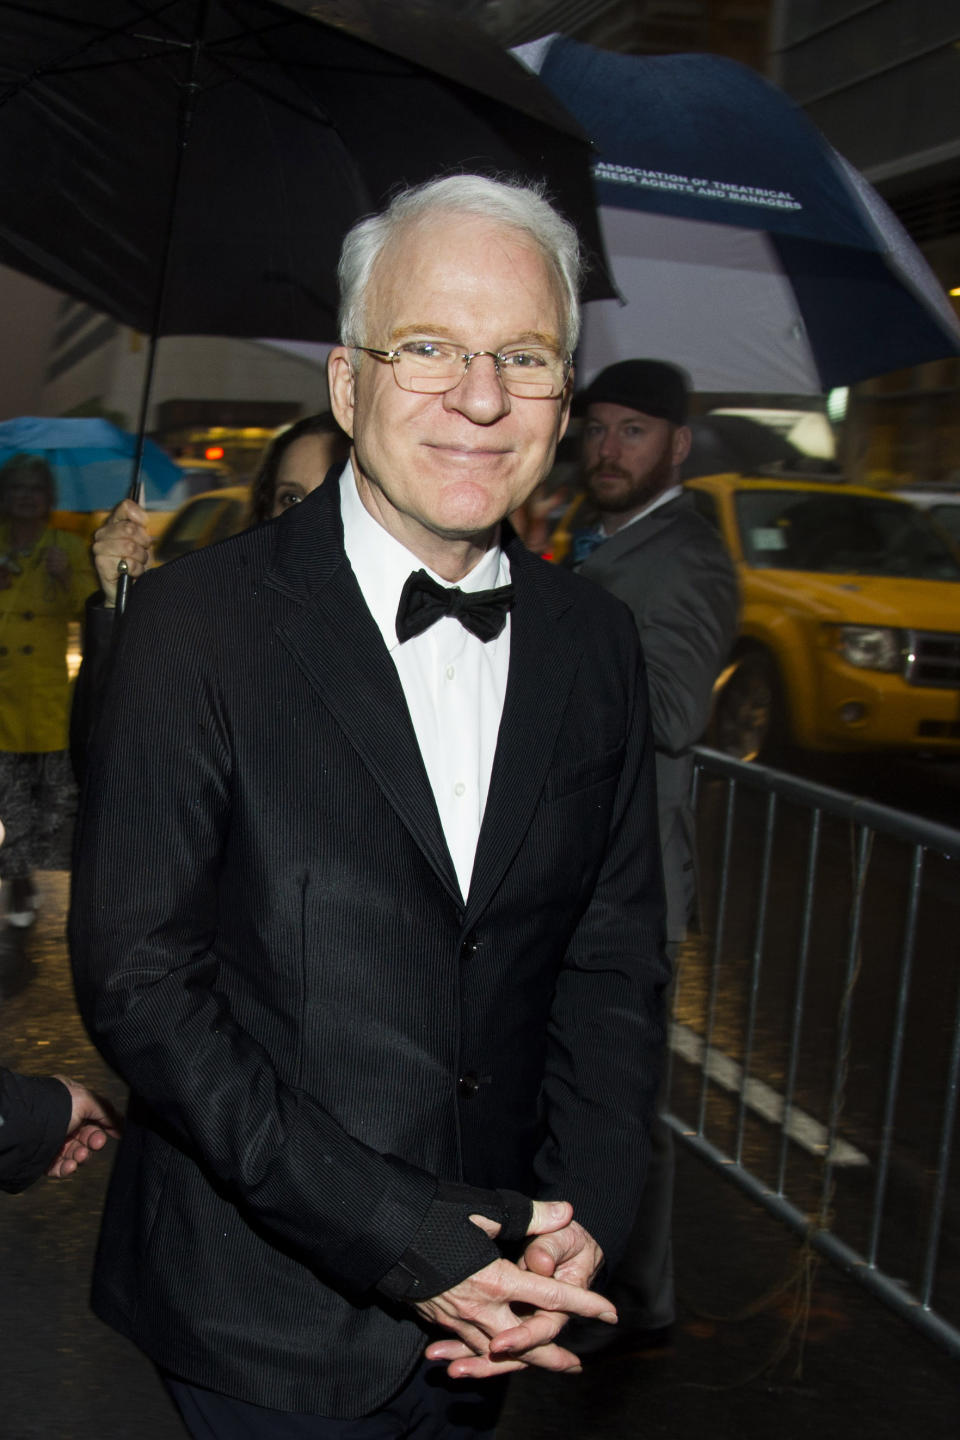 FILE - In this May 19, 2013 file photo, Steve Martin attends the 2013 Drama Desk Awards in New York. The honorary Academy Awards go to Martin, Angelina Jolie, Angela Lansbury and Italian costume designer Piero Tosi. The film academy announced Thursday, Sept. 5, 2013, that Jolie will receive the Jean Hersholt Humanitarian Award, while Martin, Lansbury and Tosi will get Oscars recognizing their career achievements. (Photo by Charles Sykes/Invision/AP, File)